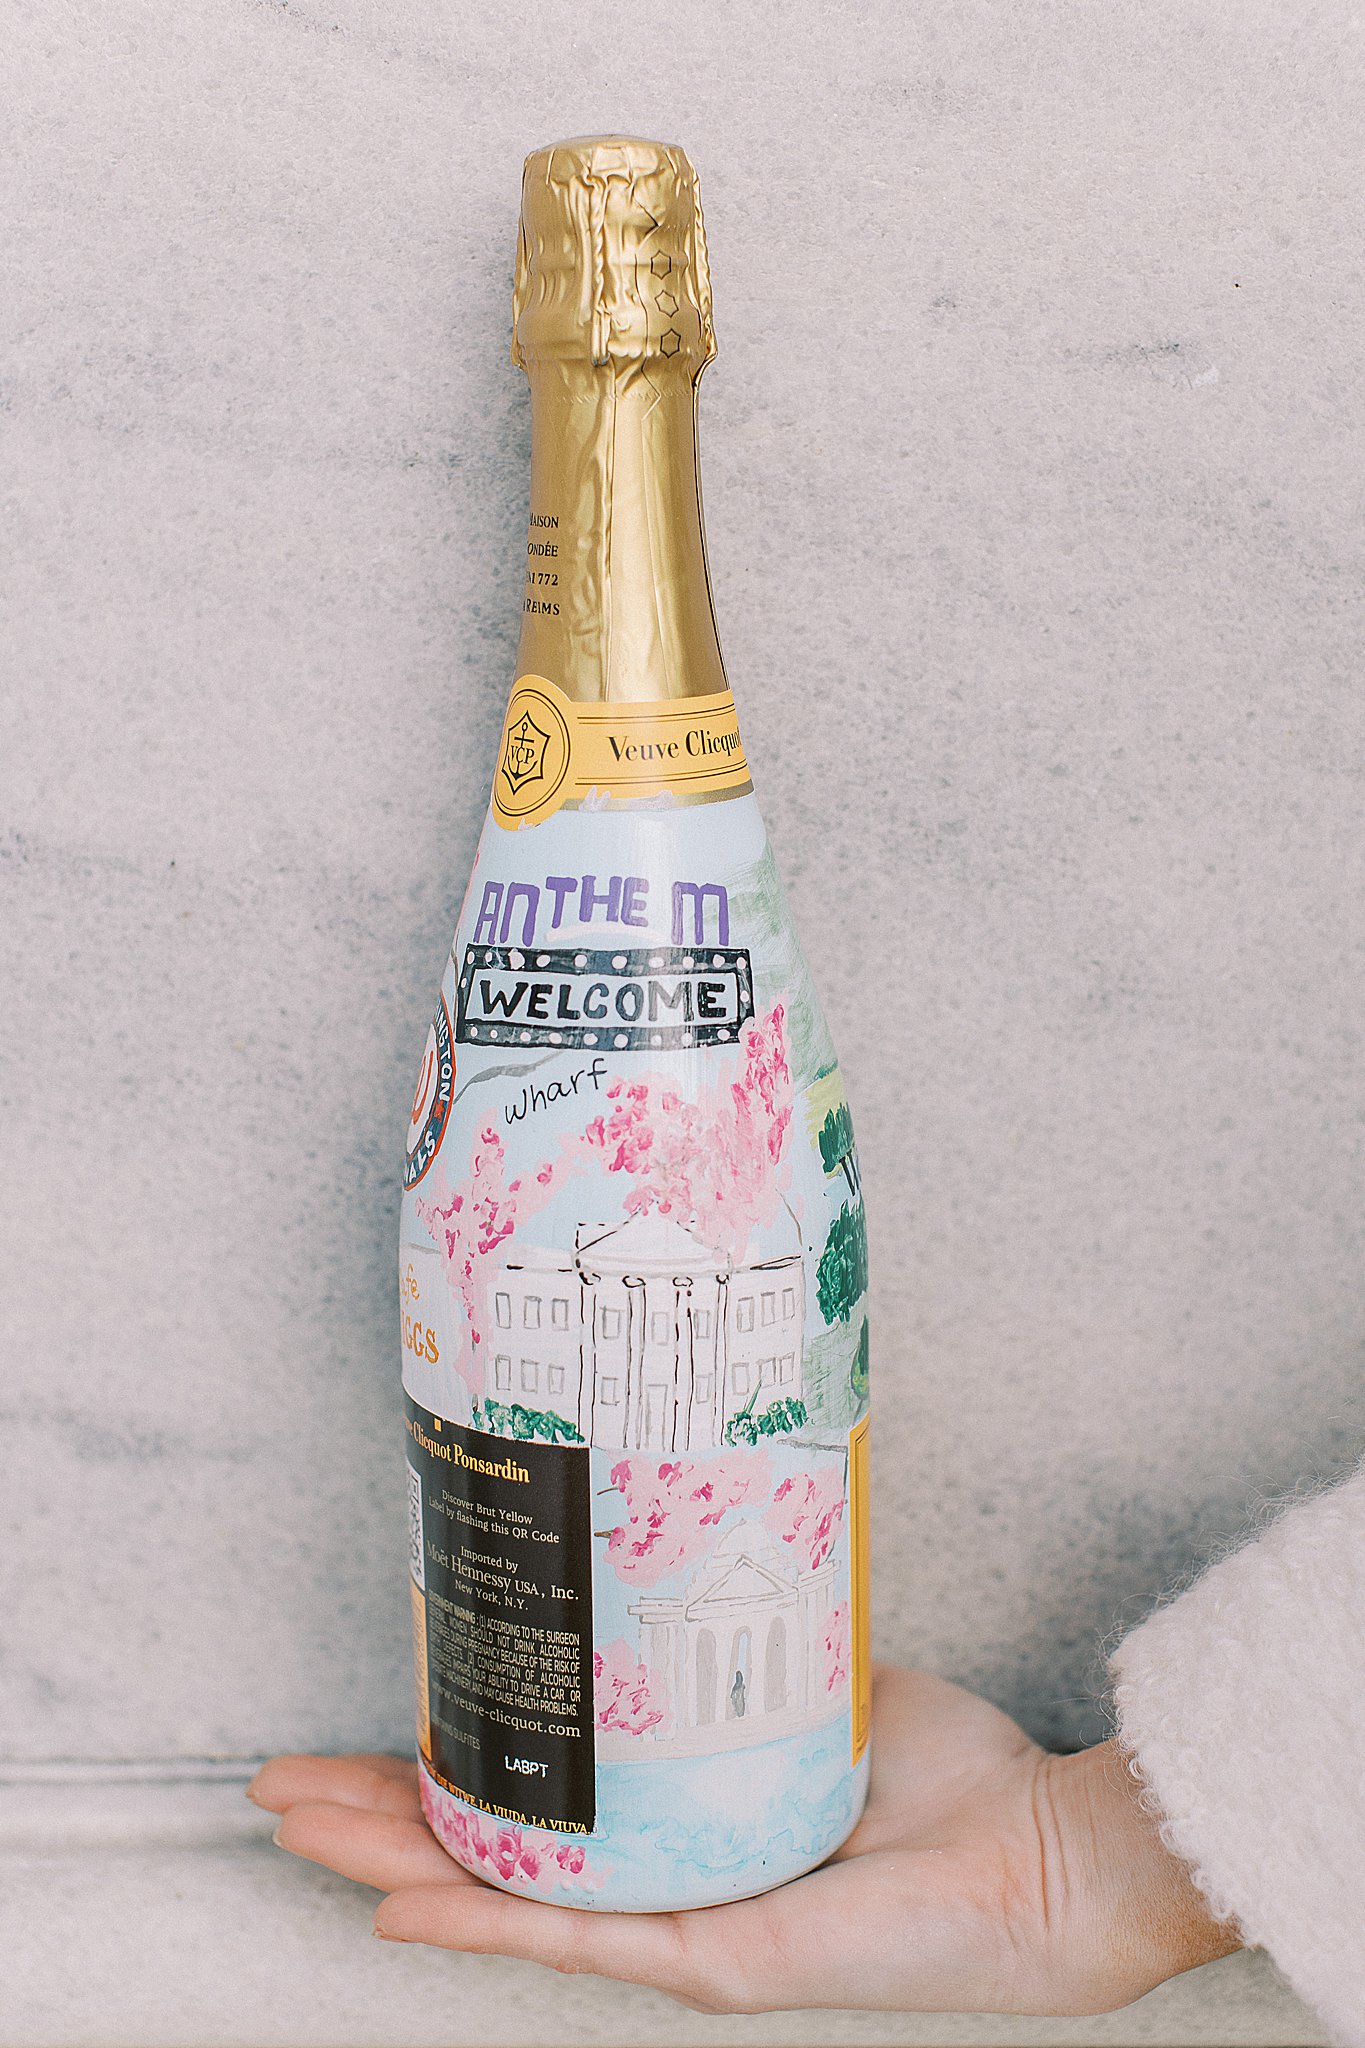 Veuve Clicquot bottle hand painted by bisous and the bay photographed by Anna Kay Photography at DC capitol